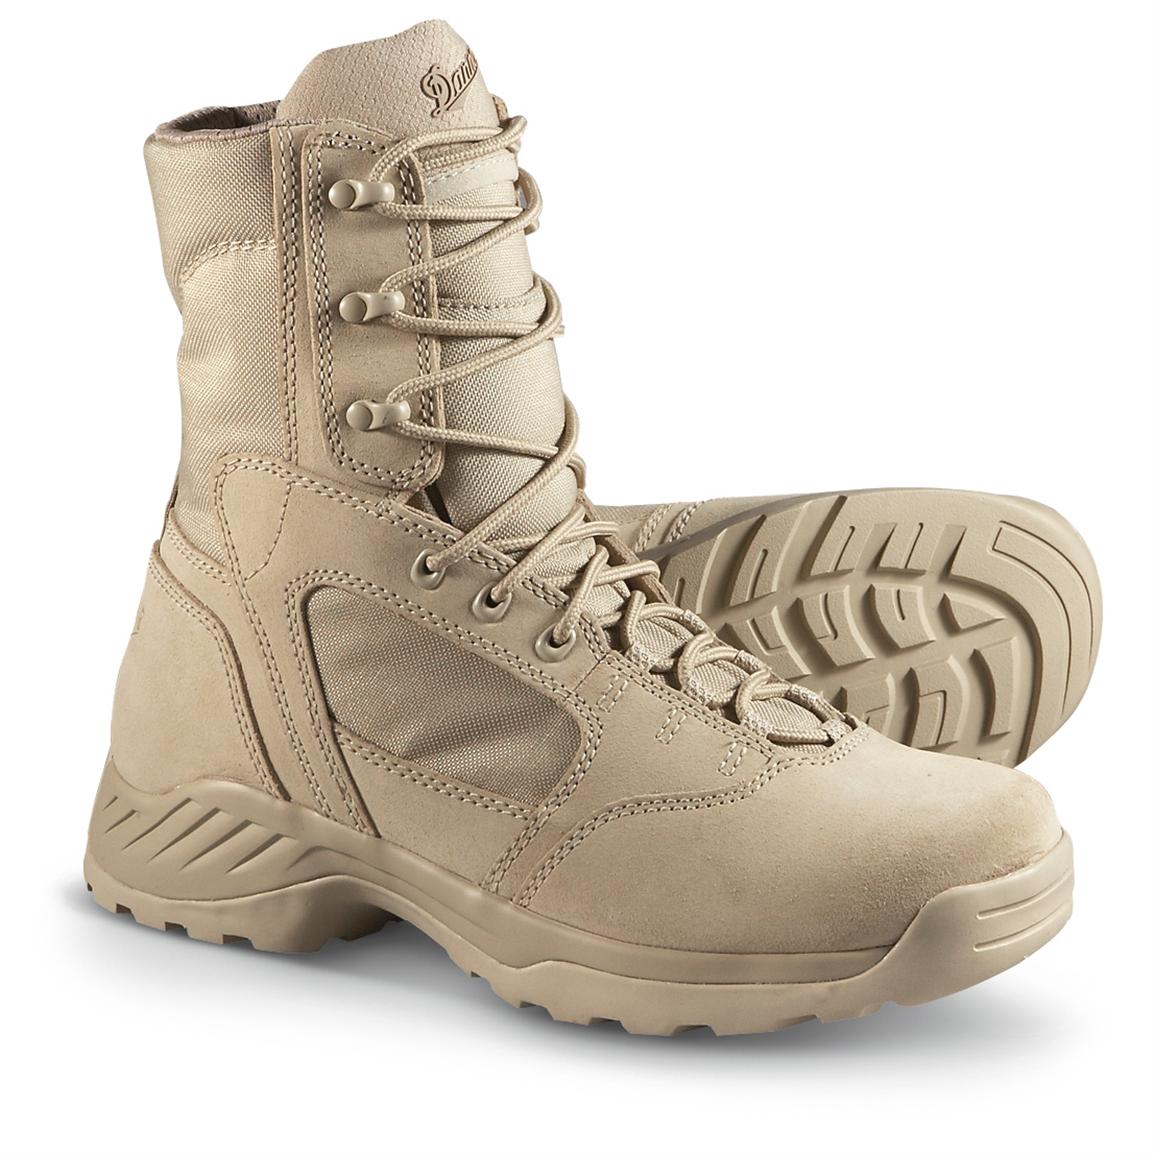 Danner Work Boots Sale - Yu Boots